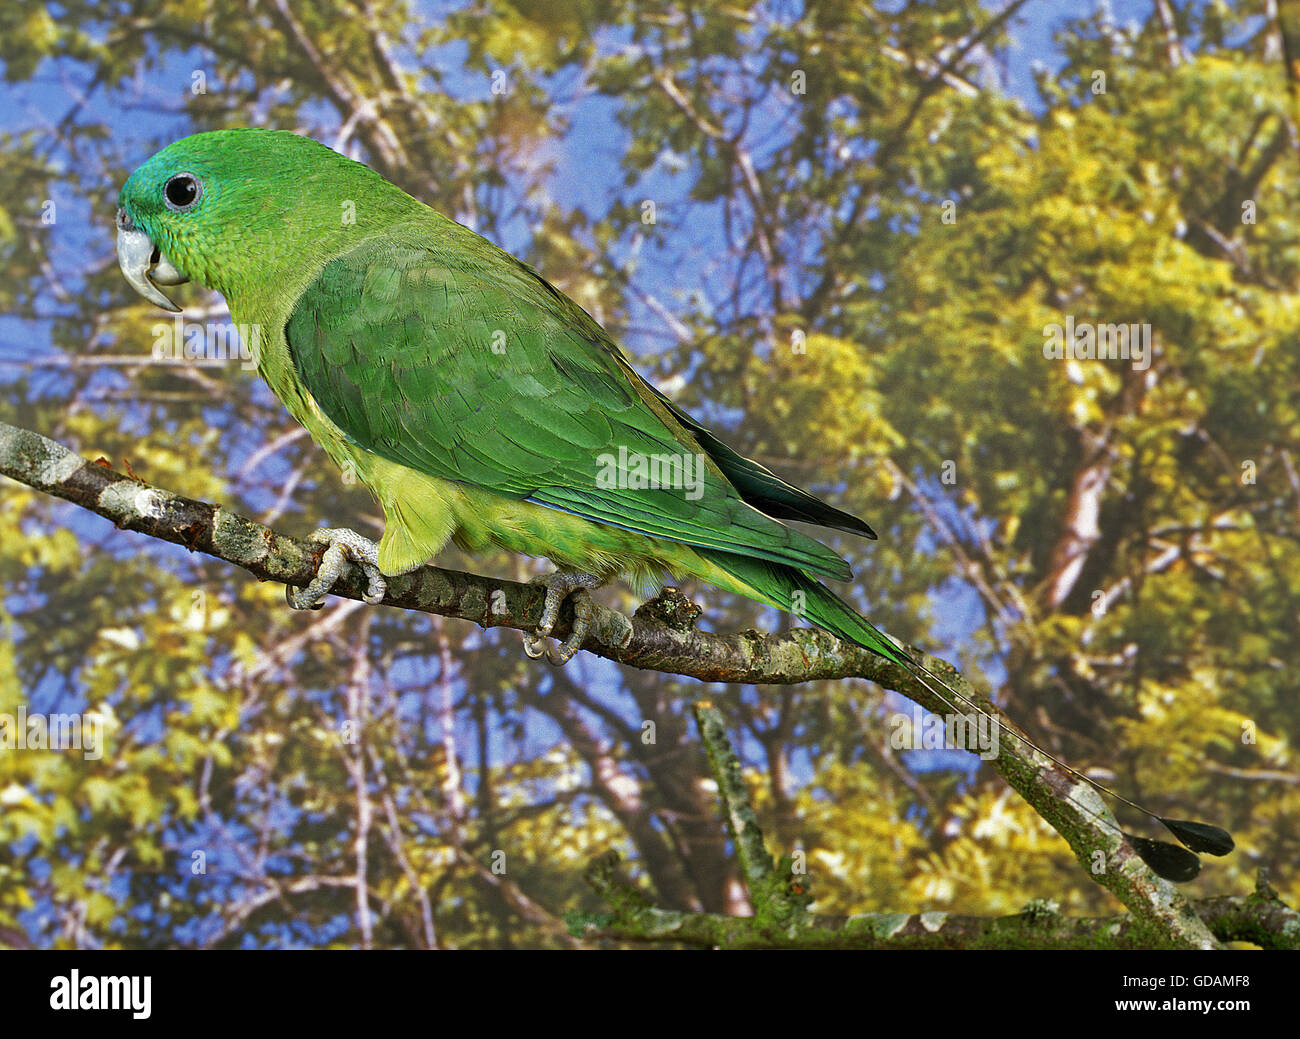 Racket-Tail Parrot, prioniturus sp., Adult on Branch Stock Photo